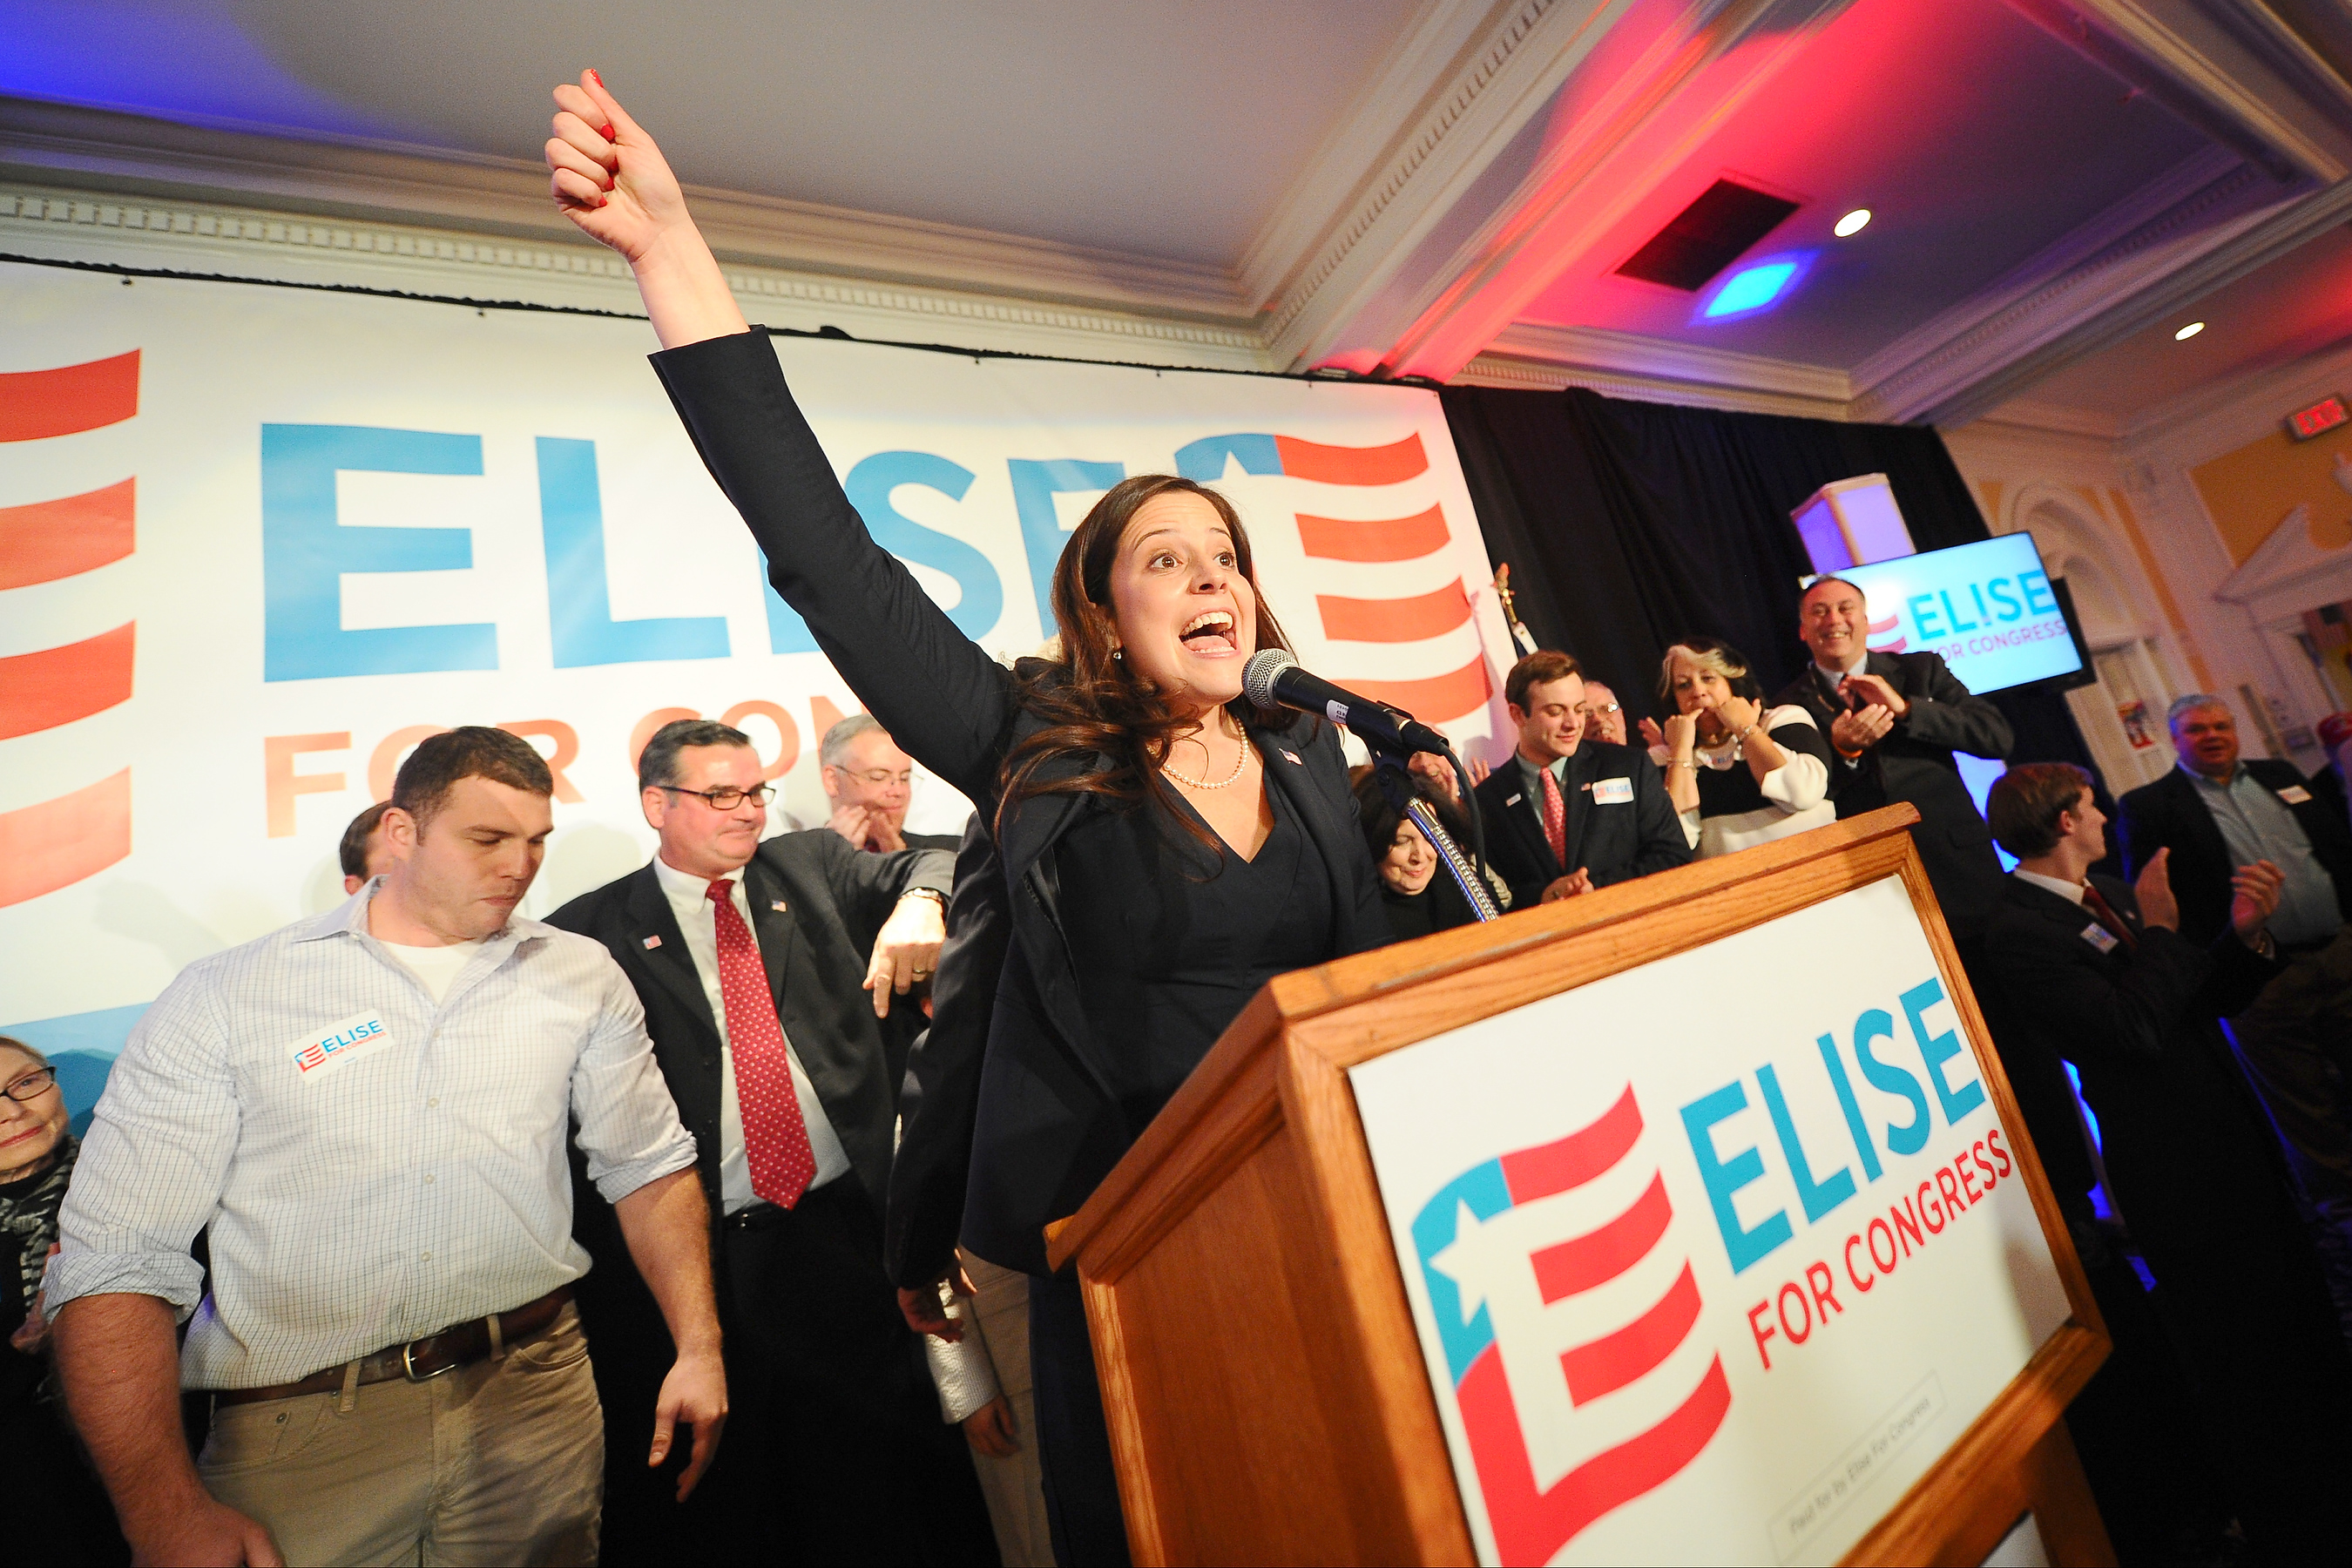 Elise Stefanik celebrates her win in the 21st Congressional district on election night at the Queensbury Hotel in Glens Falls, N.Y., on Tuesday, Nov. 4, 2014. (Steve Jacobs—AP)